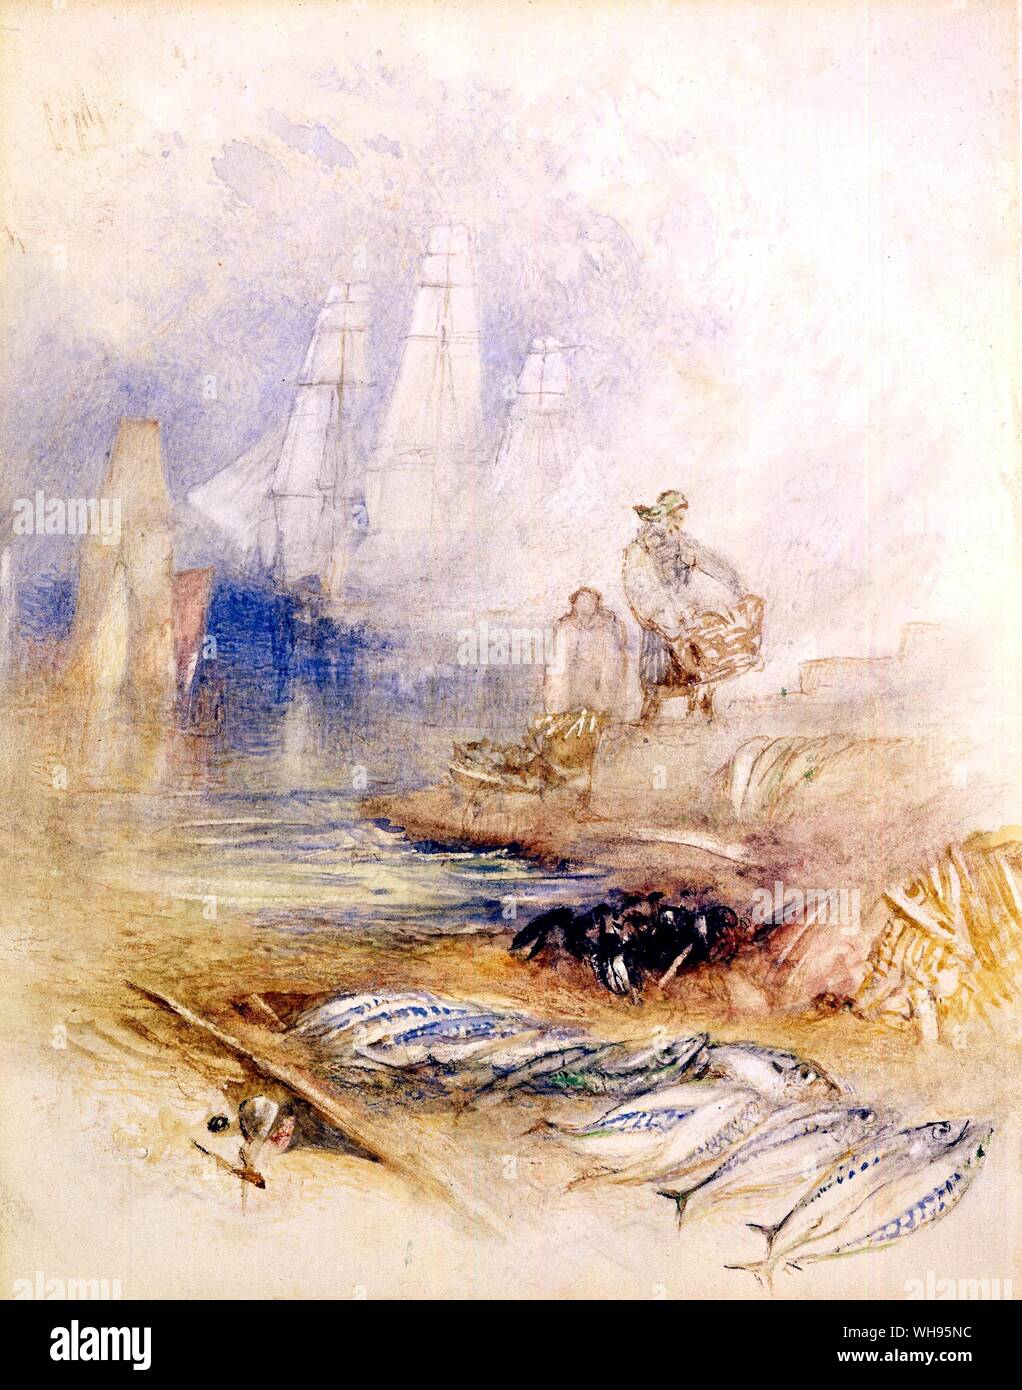 'Vignette with mackerel in the foreground' by J M W Turner, 1820-23 Stock Photo